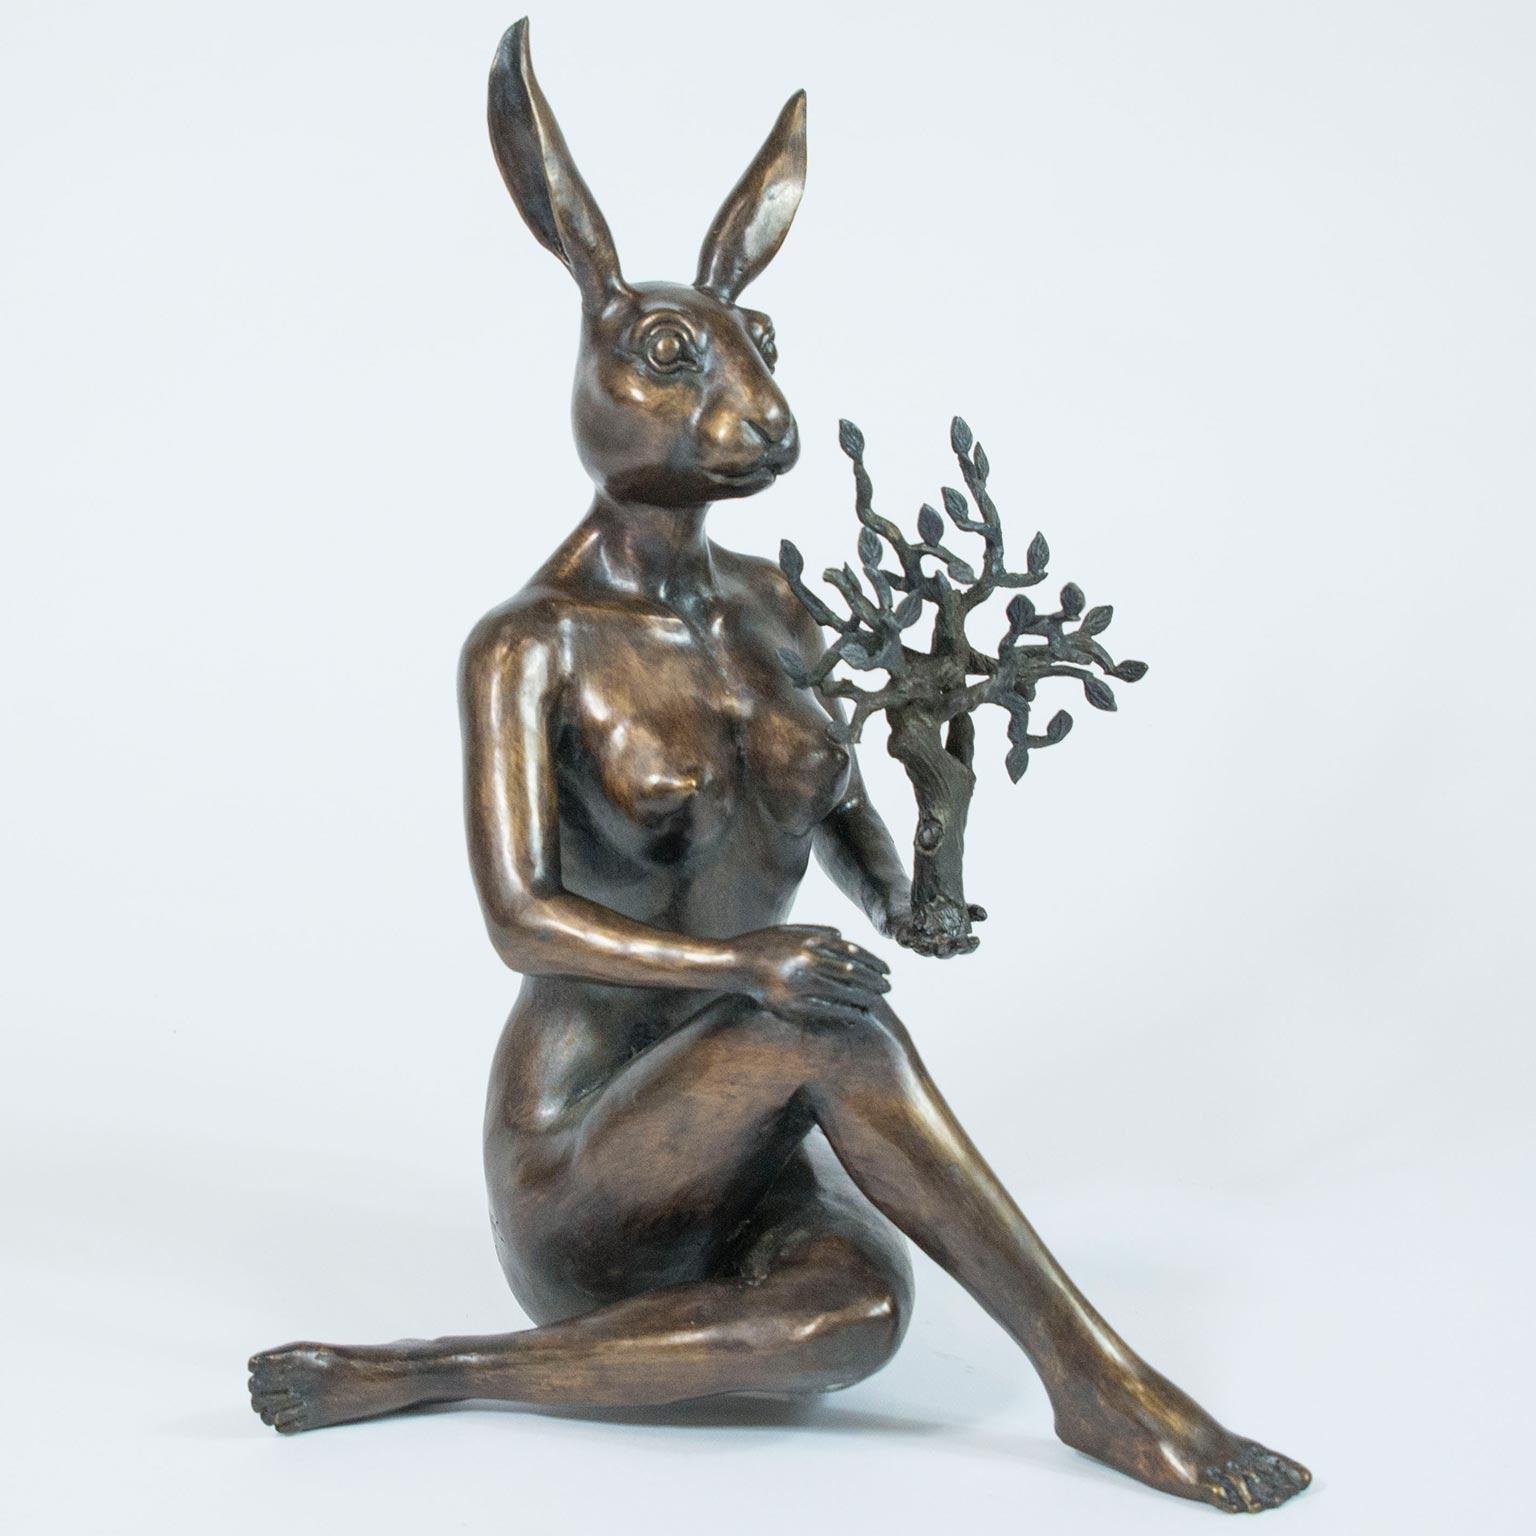 Gillie and Marc Schattner Figurative Sculpture - Authentic Bronze She was a nature lover Sculpture by Gillie and Marc